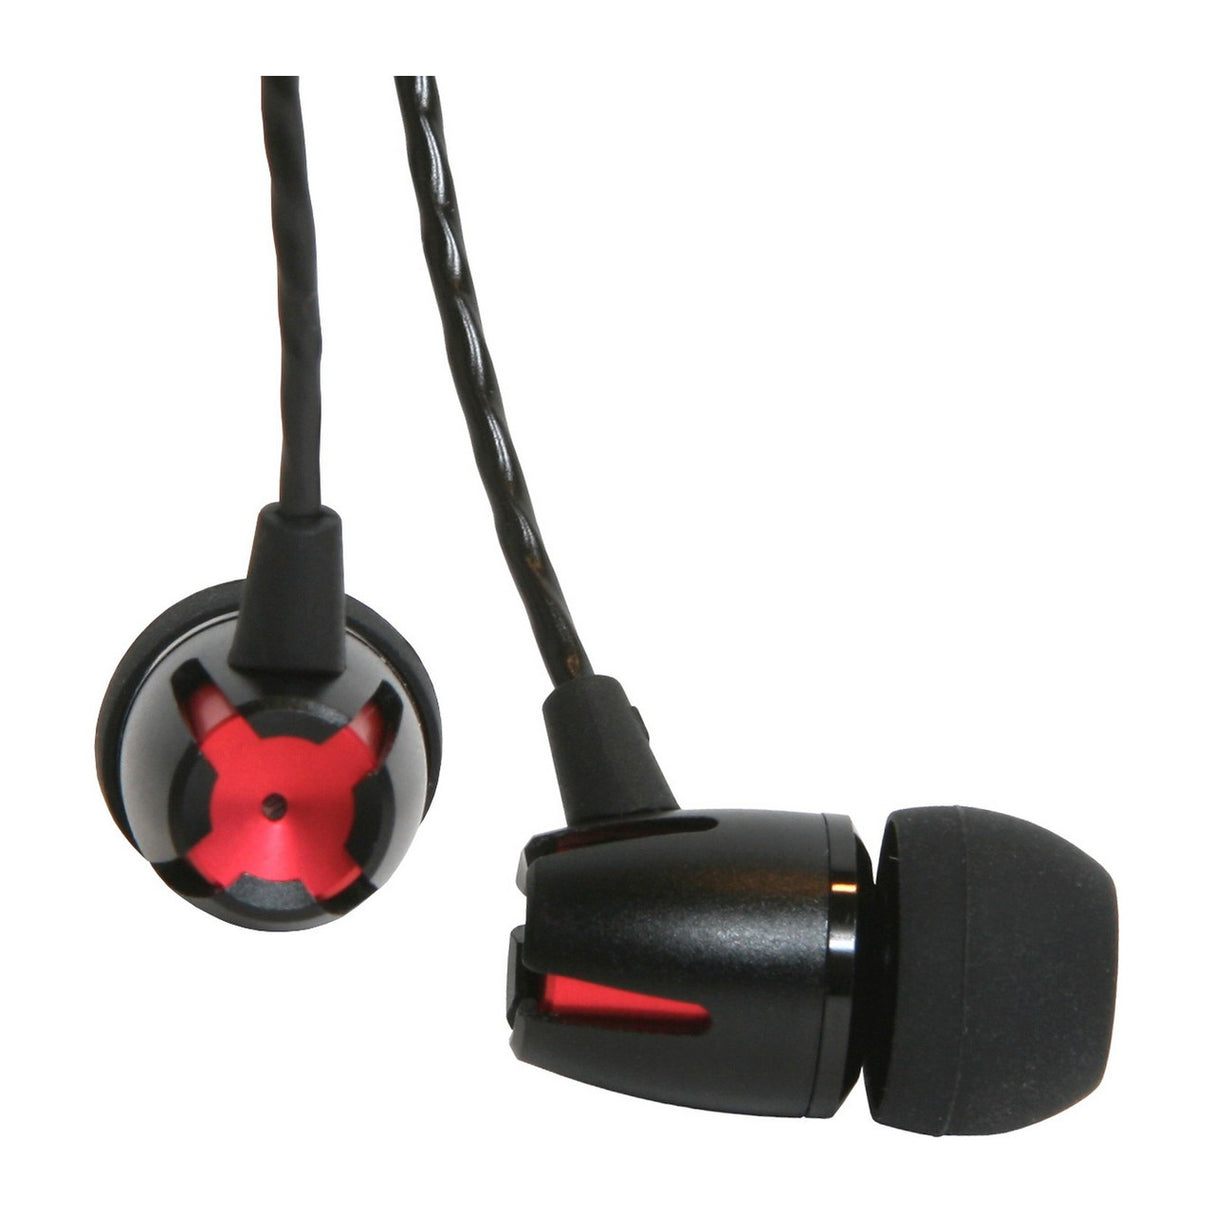 Galaxy Audio EB-4 | In Ear Stereo Personal Monitoring Headphone